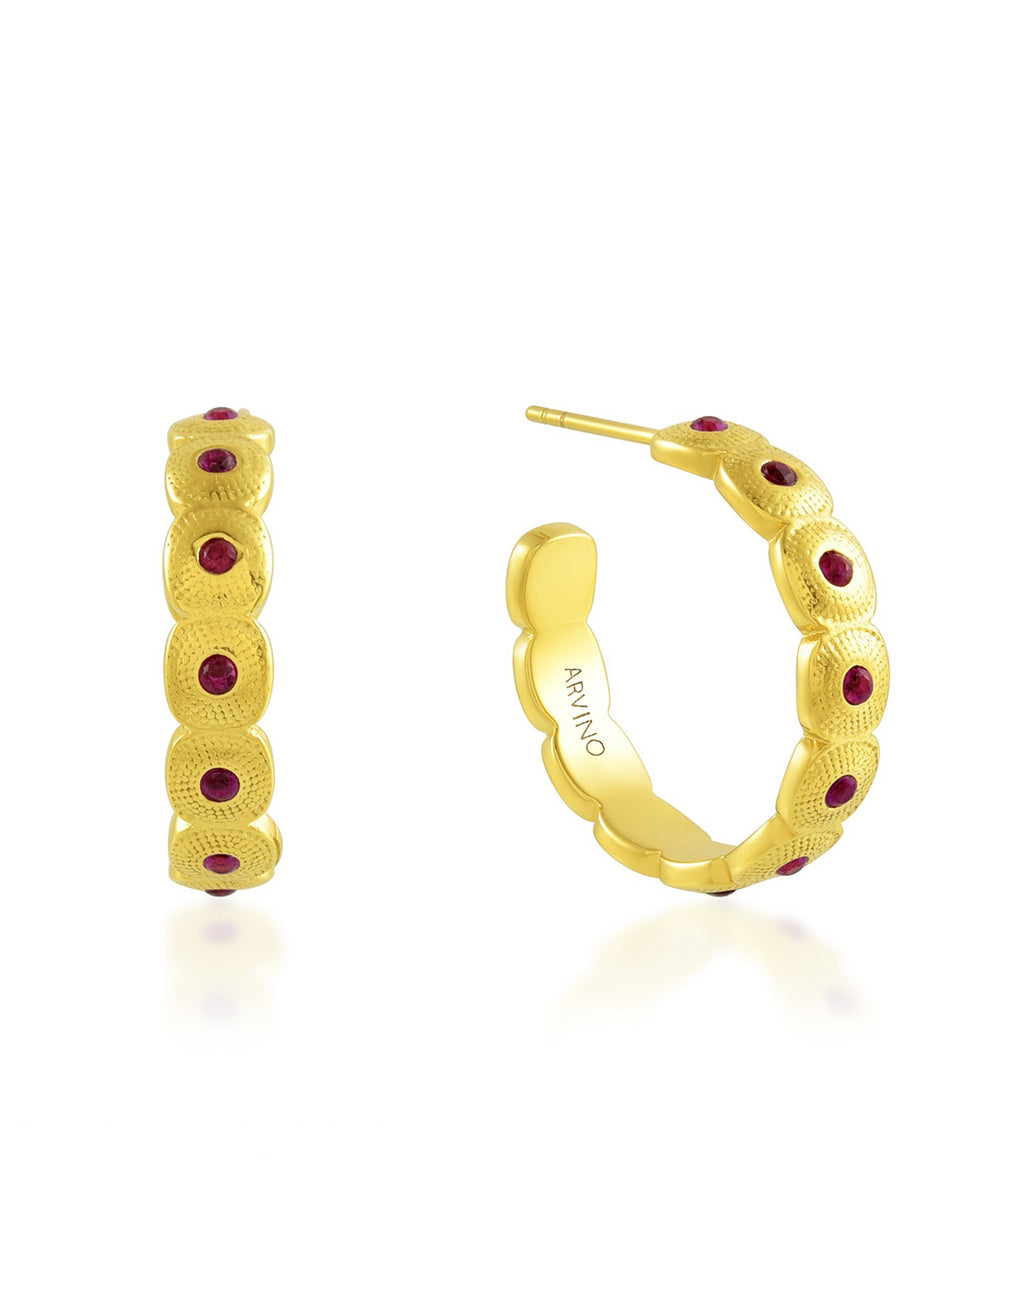 Pink Gem Honeycomb Shaped Hoops - Statement Earrings - Gold-Plated & Hypoallergenic Jewellery - Made in India - Dubai Jewellery - Dori